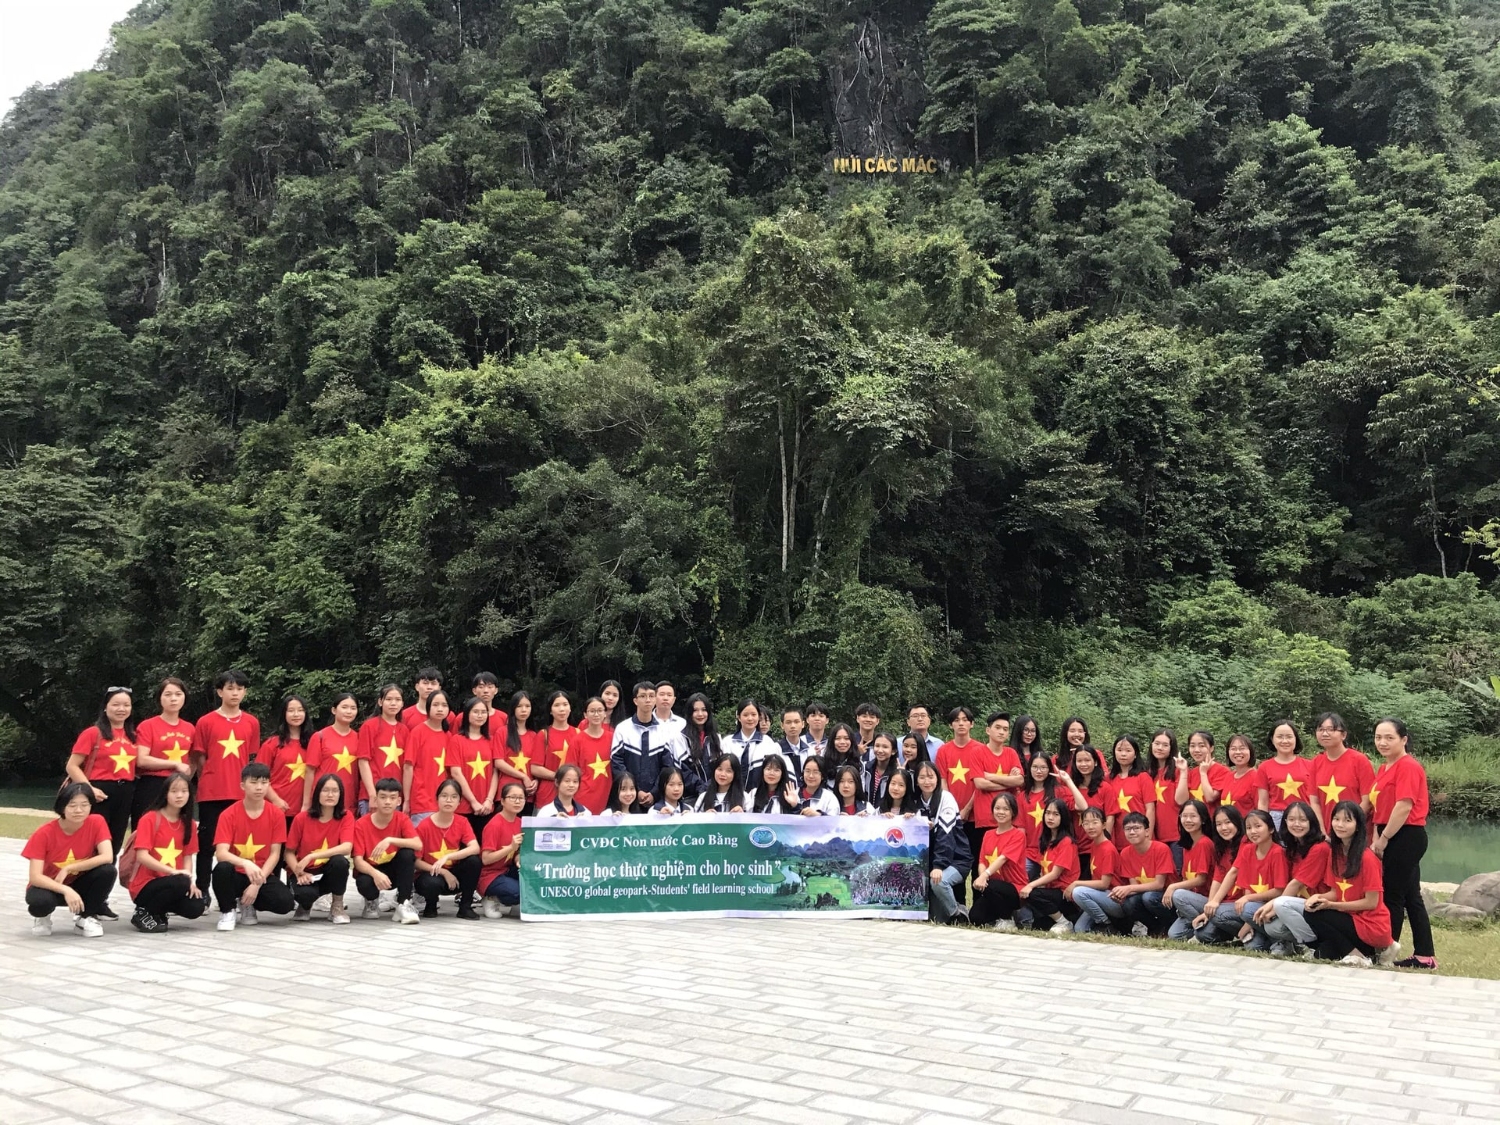 Field learning experience of “Geopark ambassador club” in Non nuoc Cao Bang UNESCO global geopark